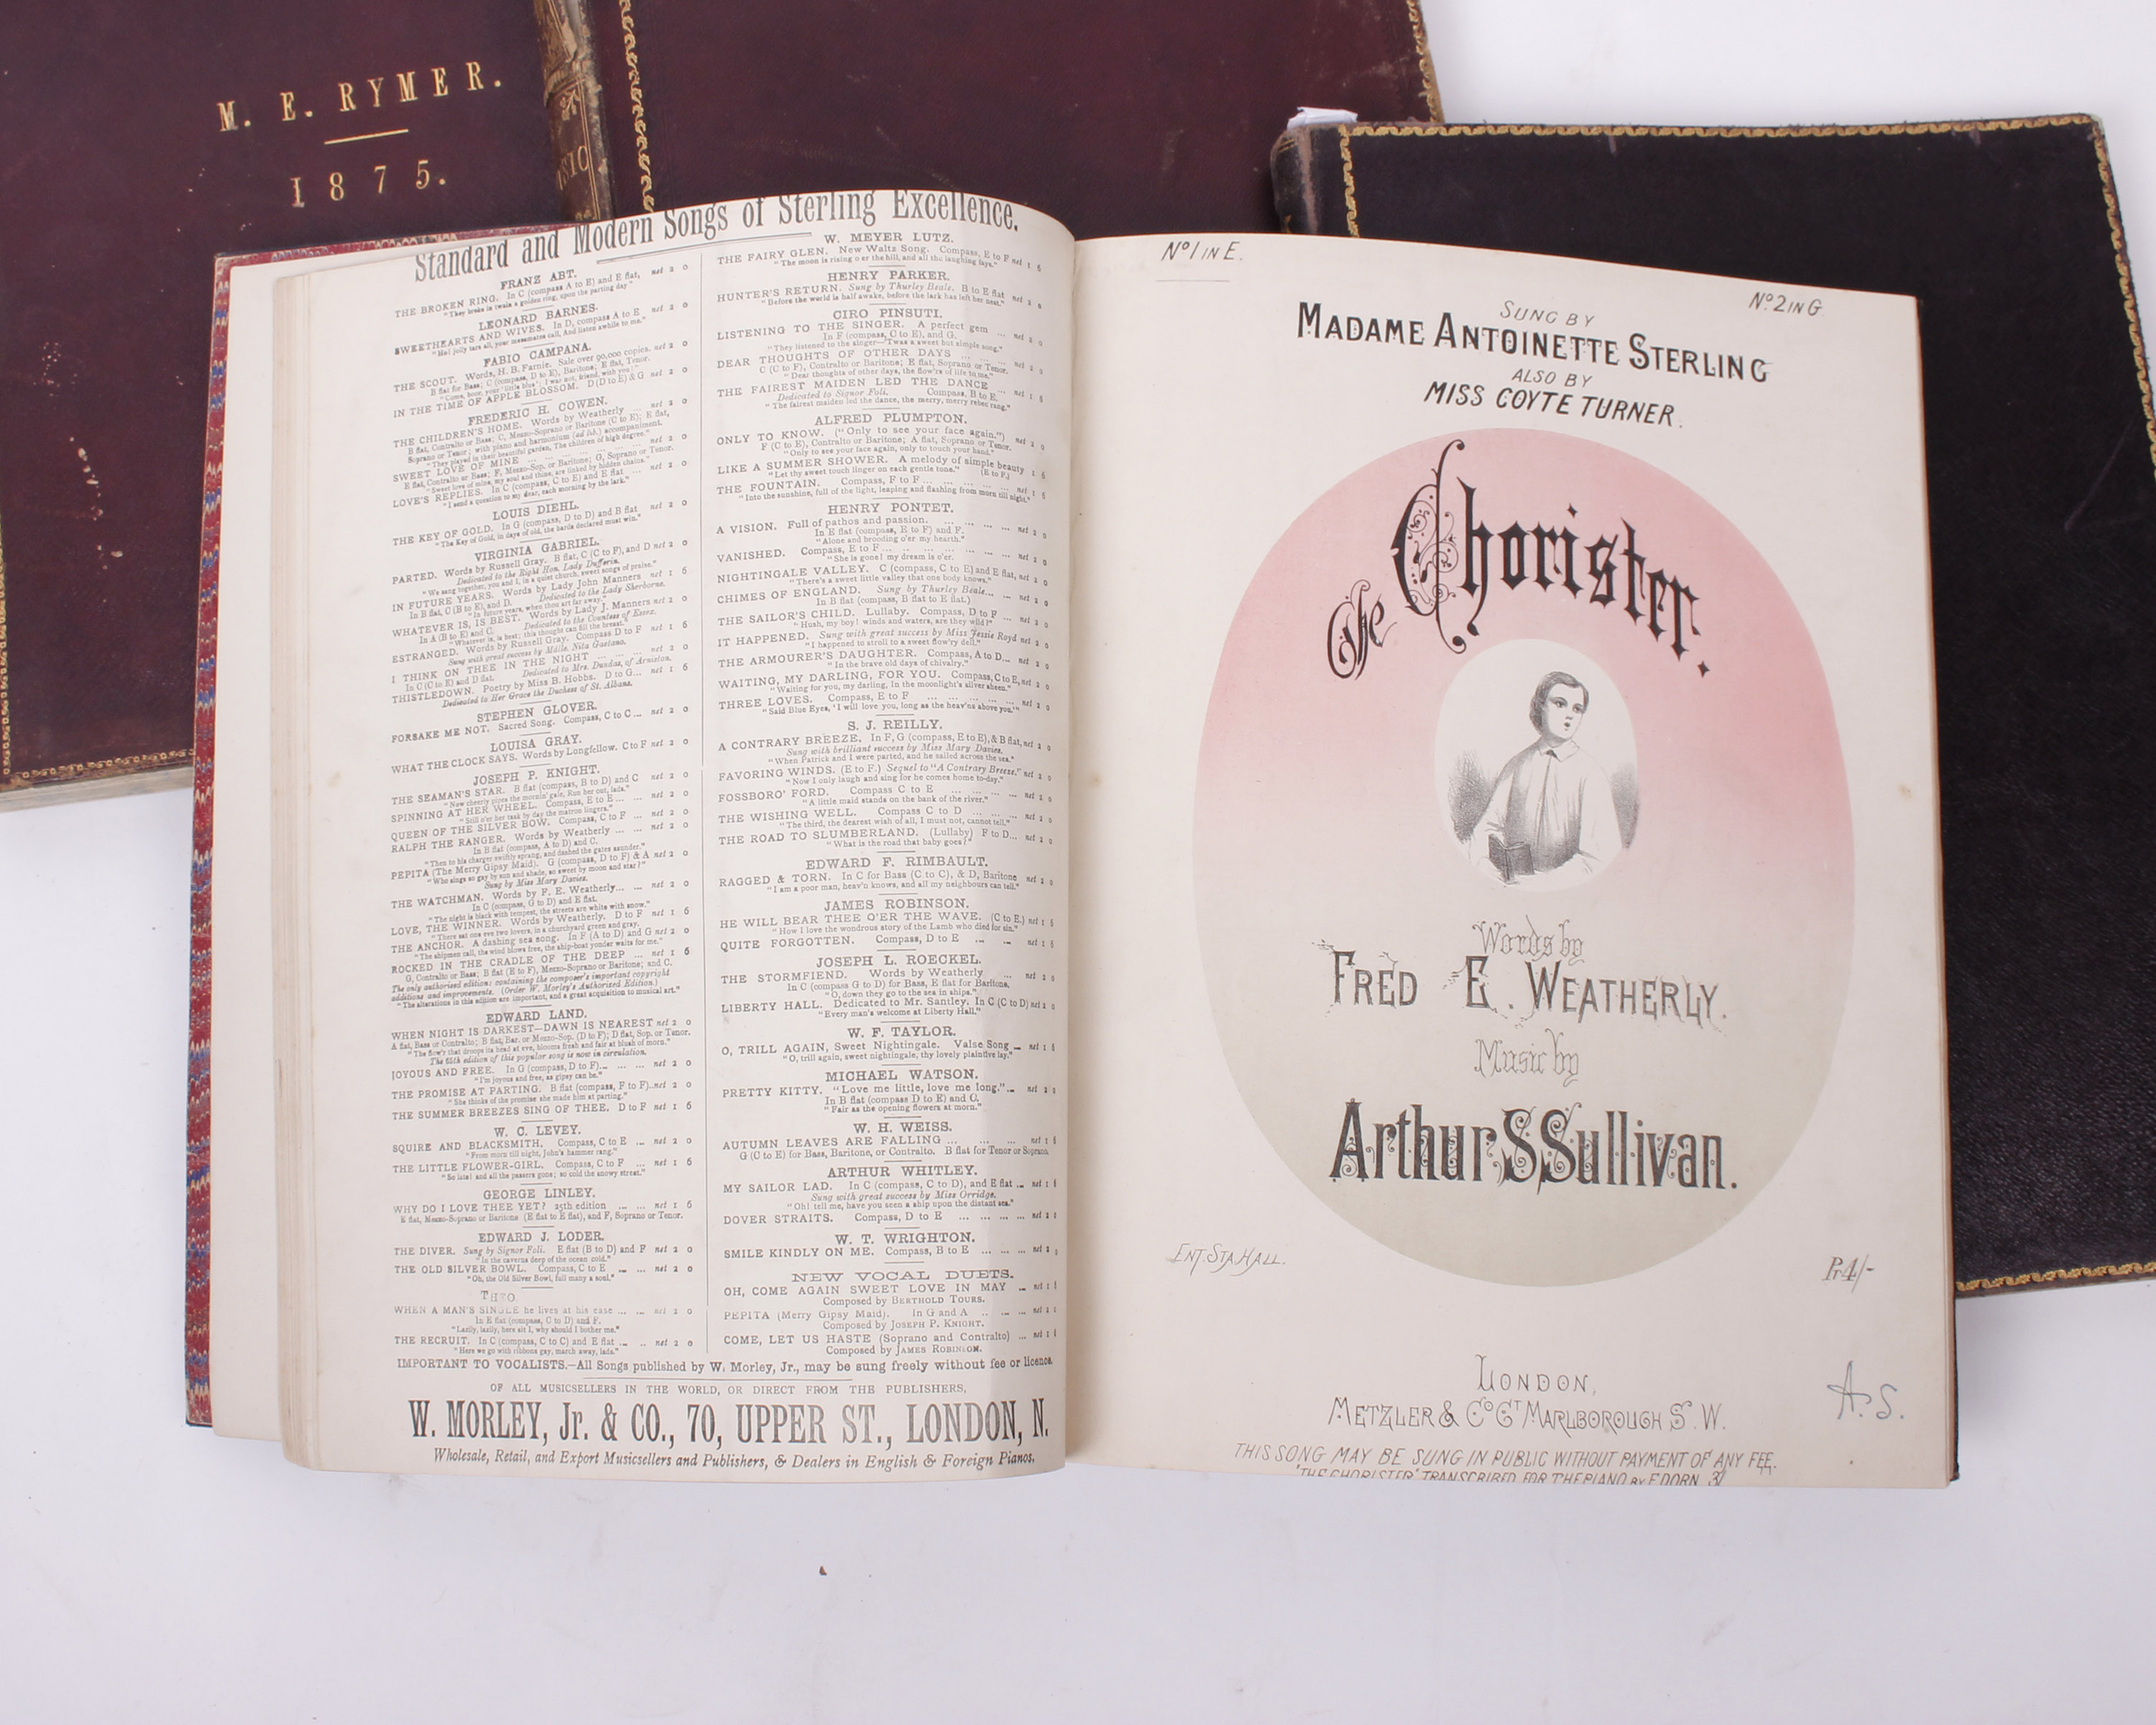 Four M.E. Rymer song books 1874/5/8 to include The Lost Chord song - music by Arthur Sullivan, The - Image 3 of 4